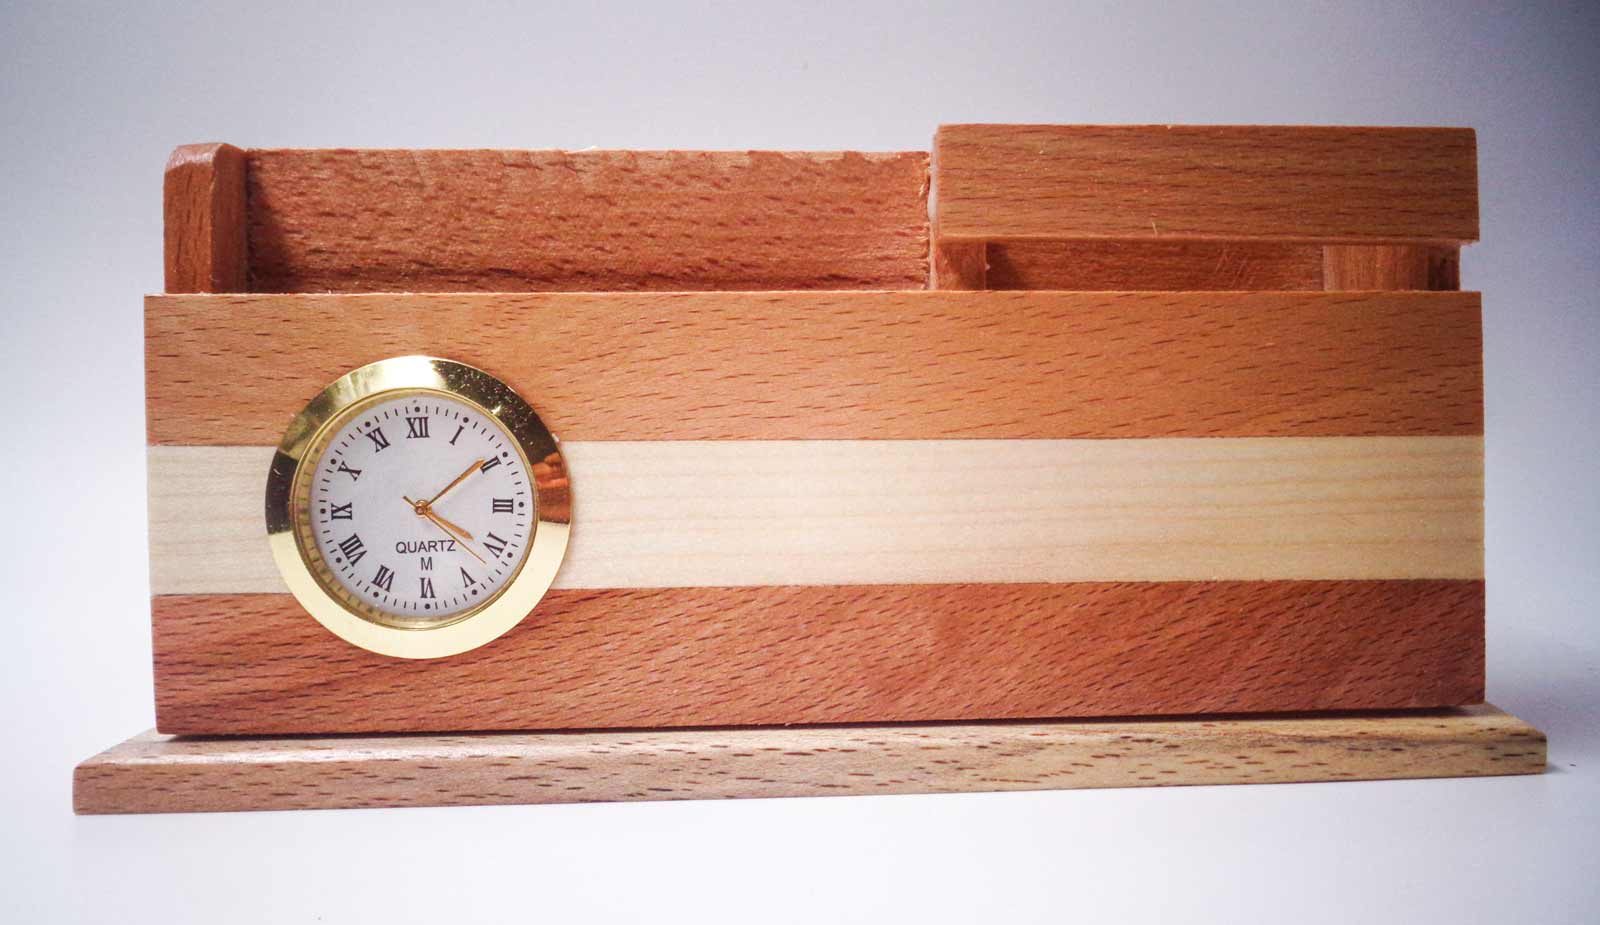  Wooden Rectangle Shape Customized Pen Stand And Card Holder With Clock  SKU 96863